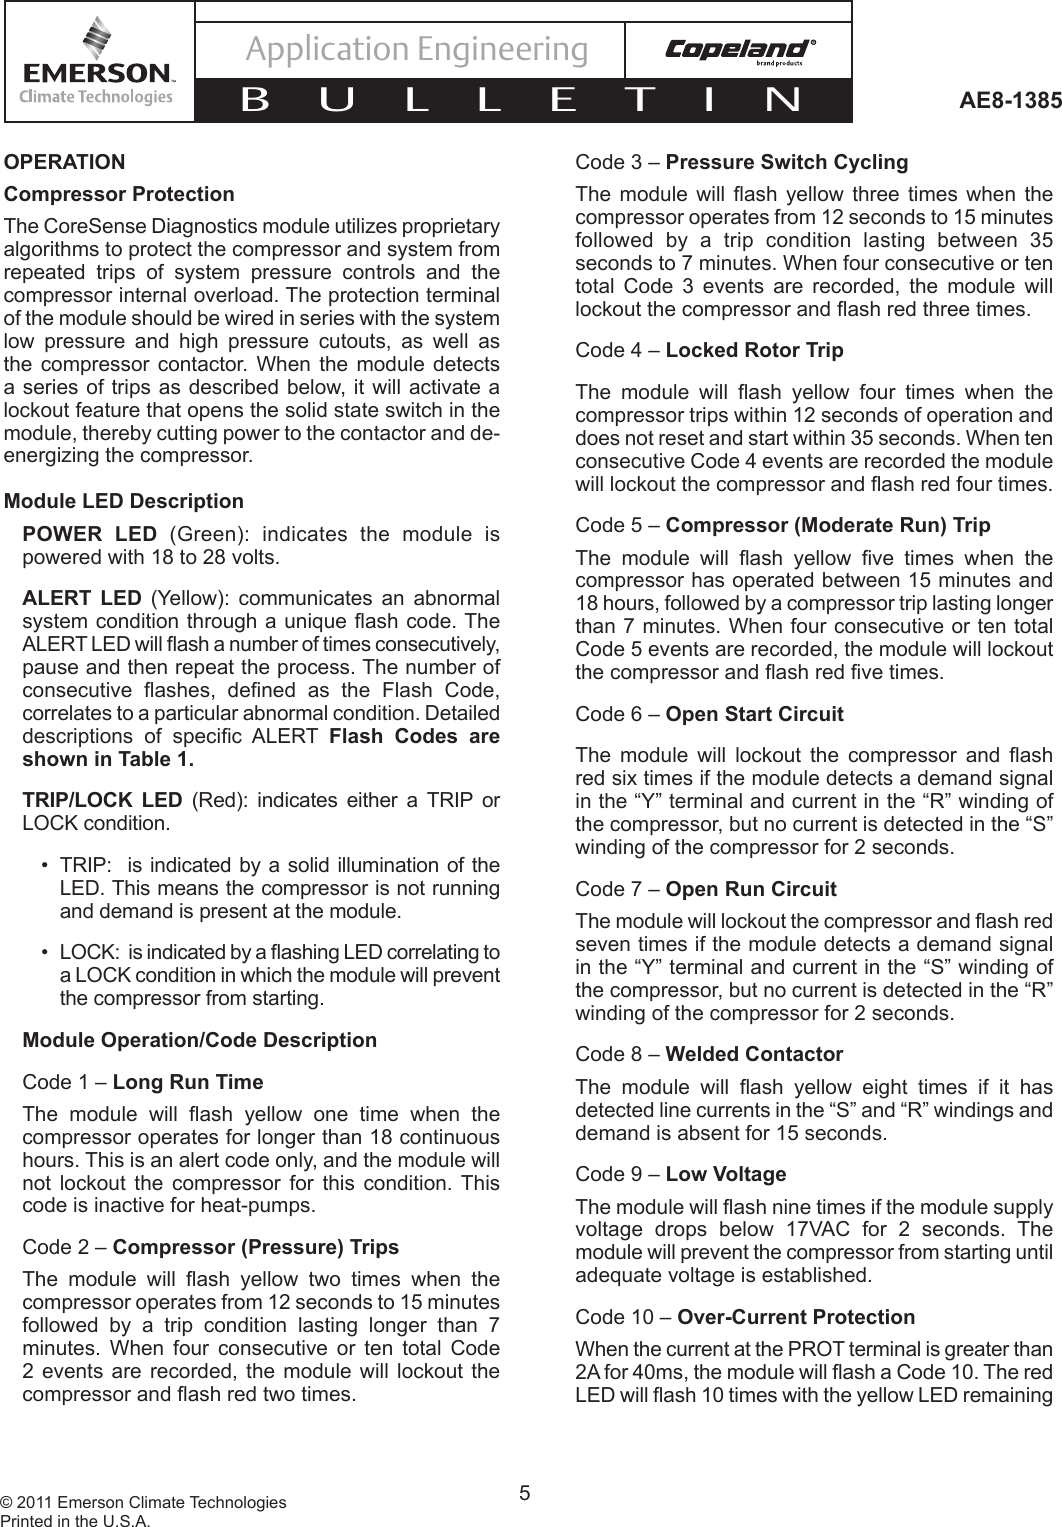 Page 5 of 12 - Emerson Emerson-Ae8-1385-Users-Manual- AE-1385, CoreSense™ Diagnostics For Copeland Scroll® UltraTech® Air Conditioning Compressors  Emerson-ae8-1385-users-manual